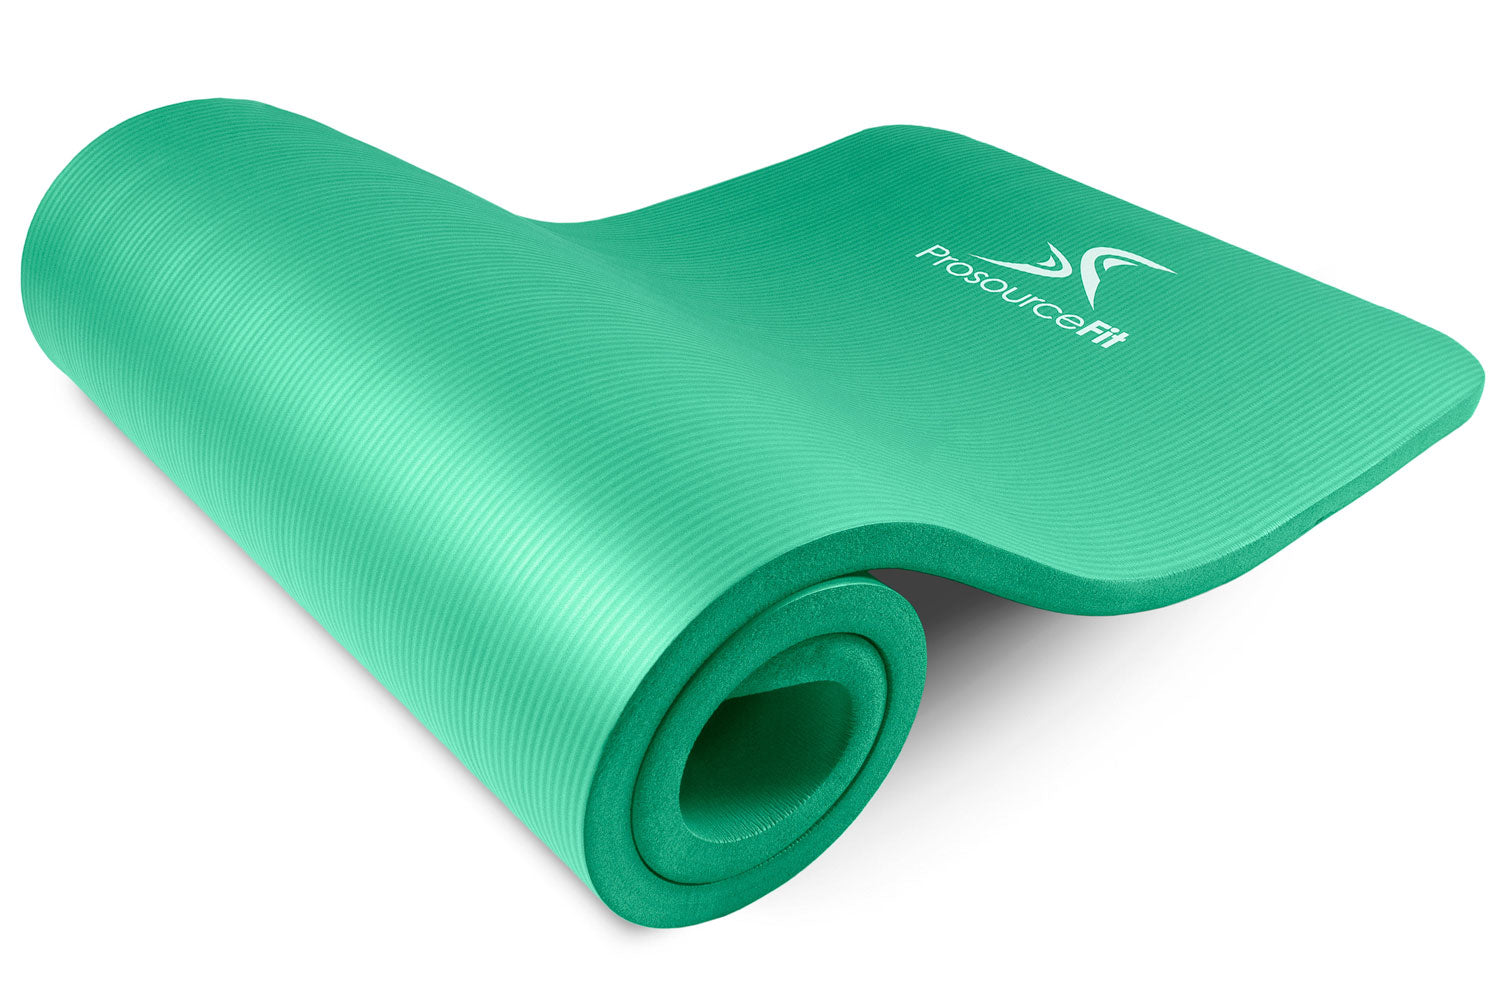 Green Extra Thick Yoga and Pilates Mat 1 inch